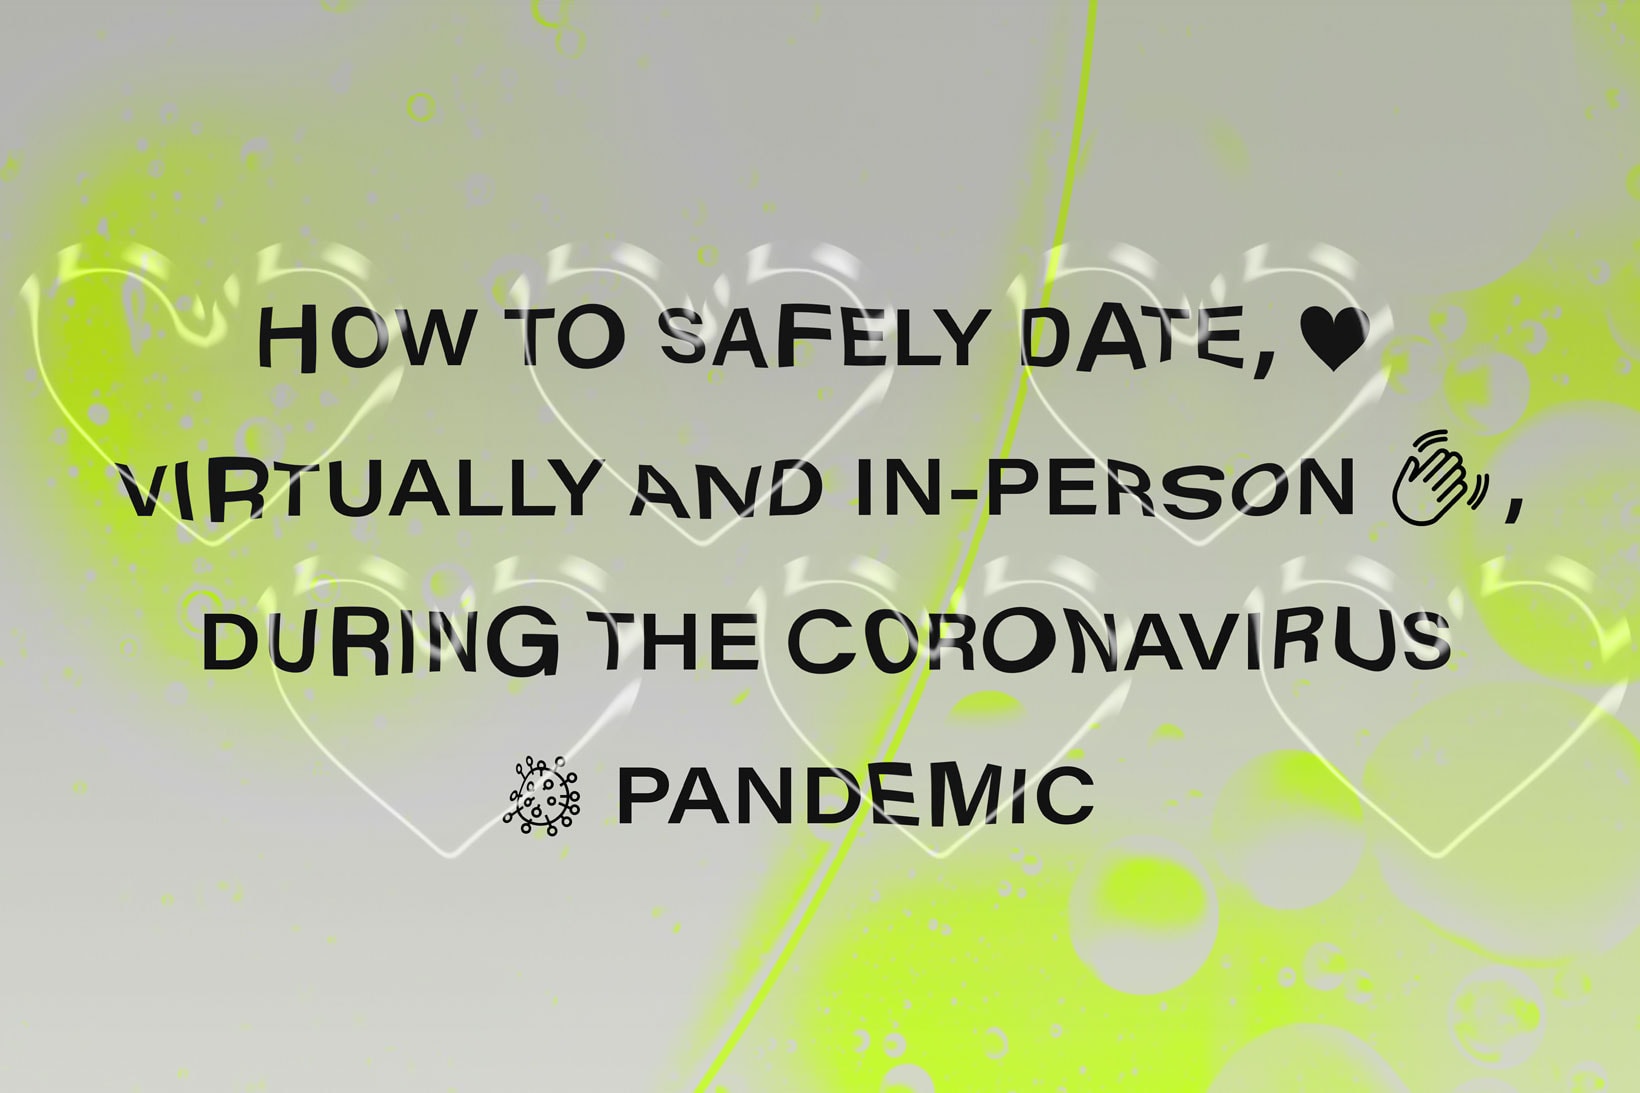 Date Dating Coronavirus COVID-19 Pandemic Safety Safely Virtual In-Person